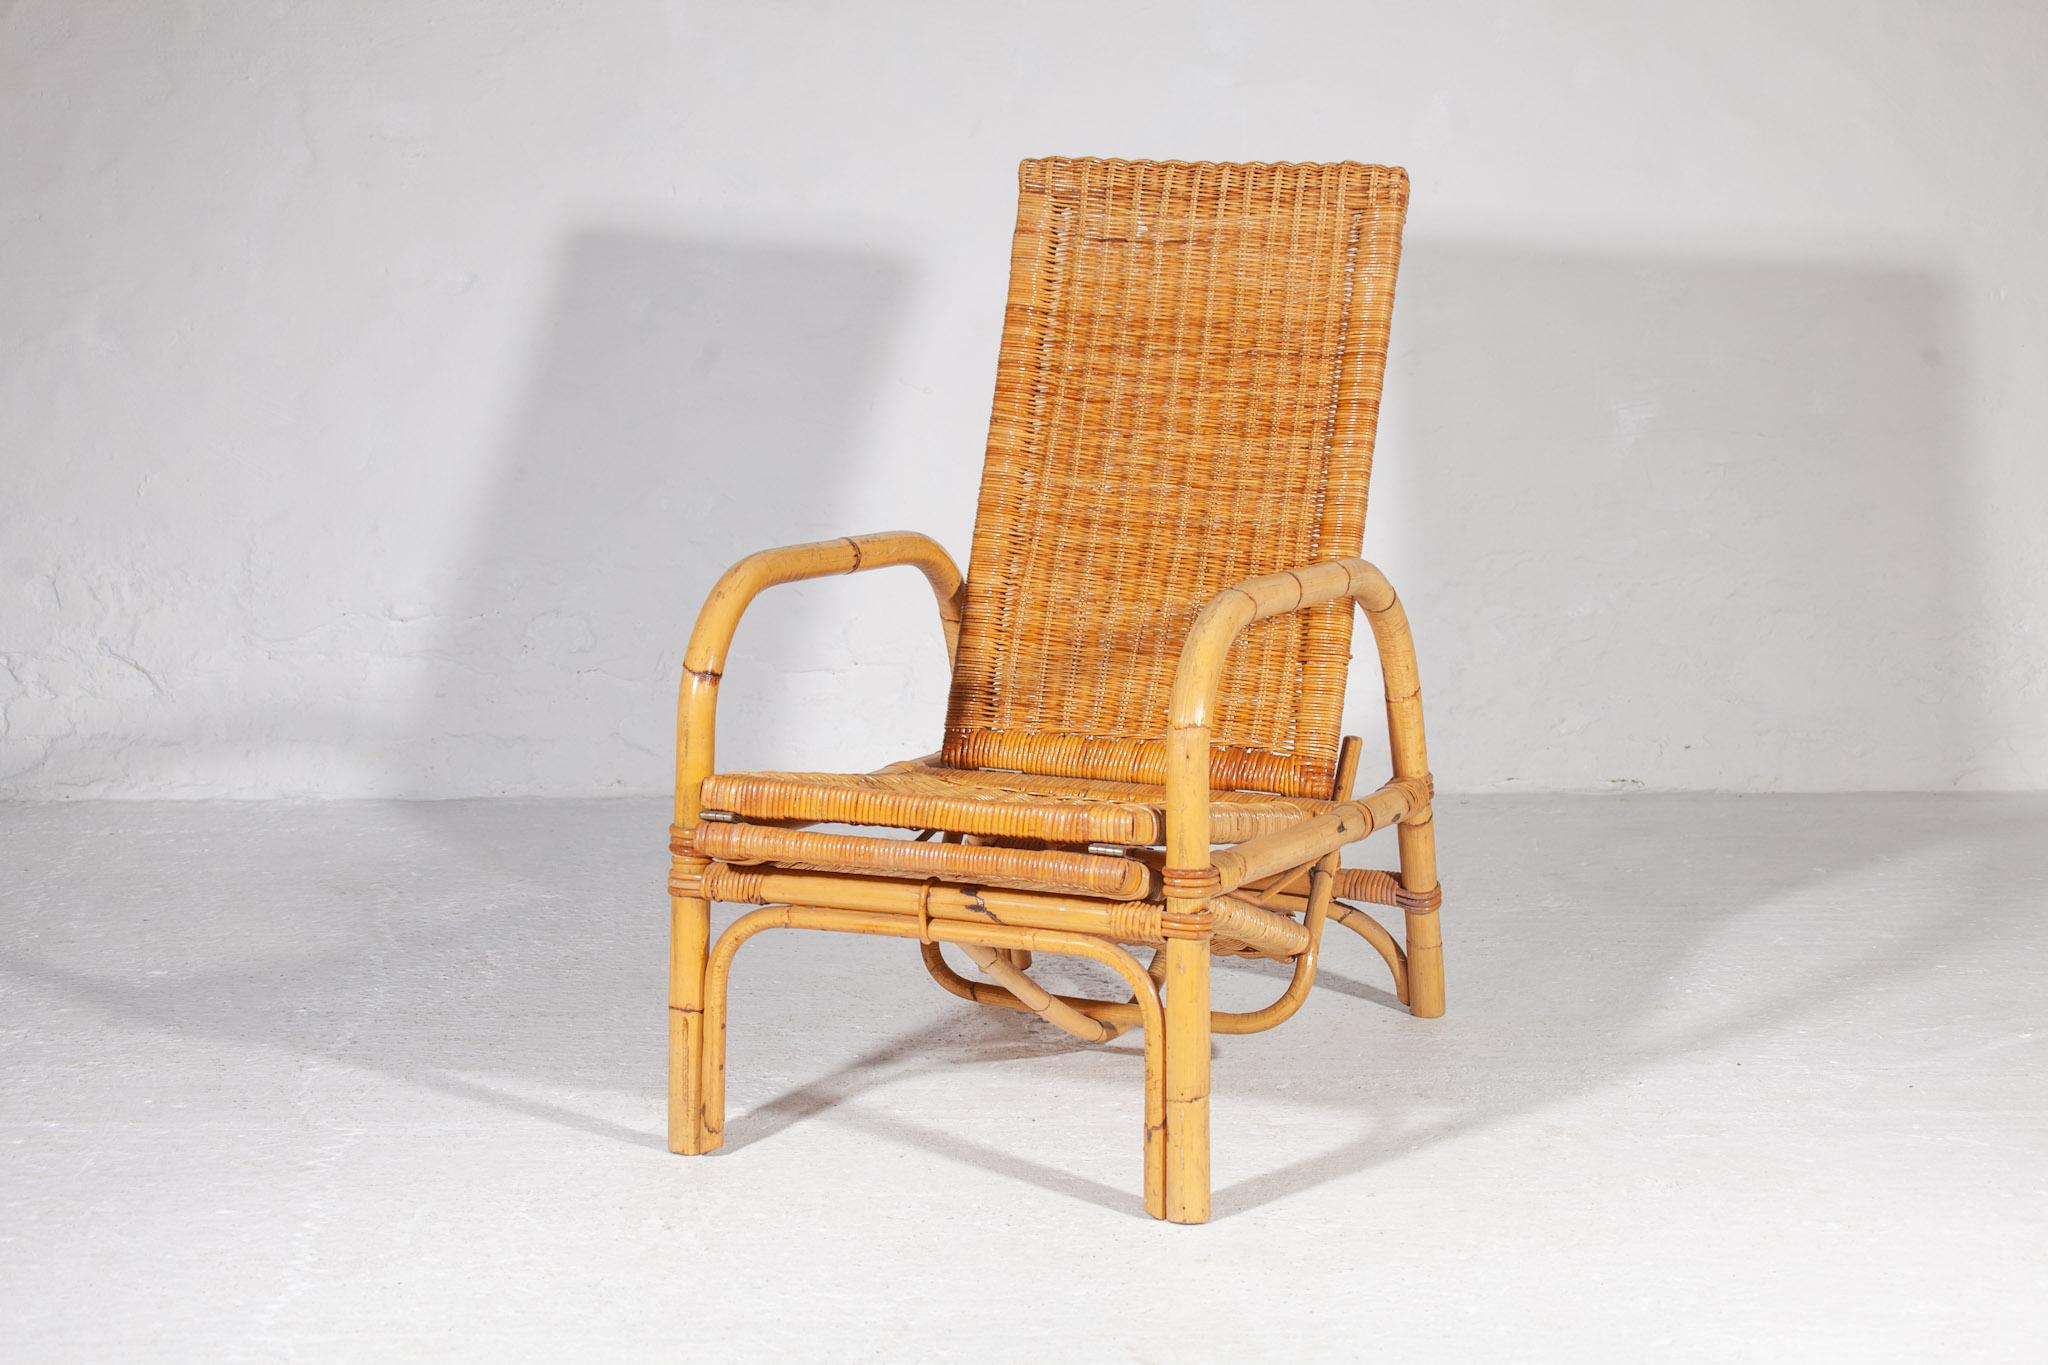 Boho chique wicker lounge chair, chaise lounge with adjustable backrest and pull-out ottoman. The backrest can be manually adjusted between six different height brackets. The lounge chair is in a very good original condition. A great multifunctional